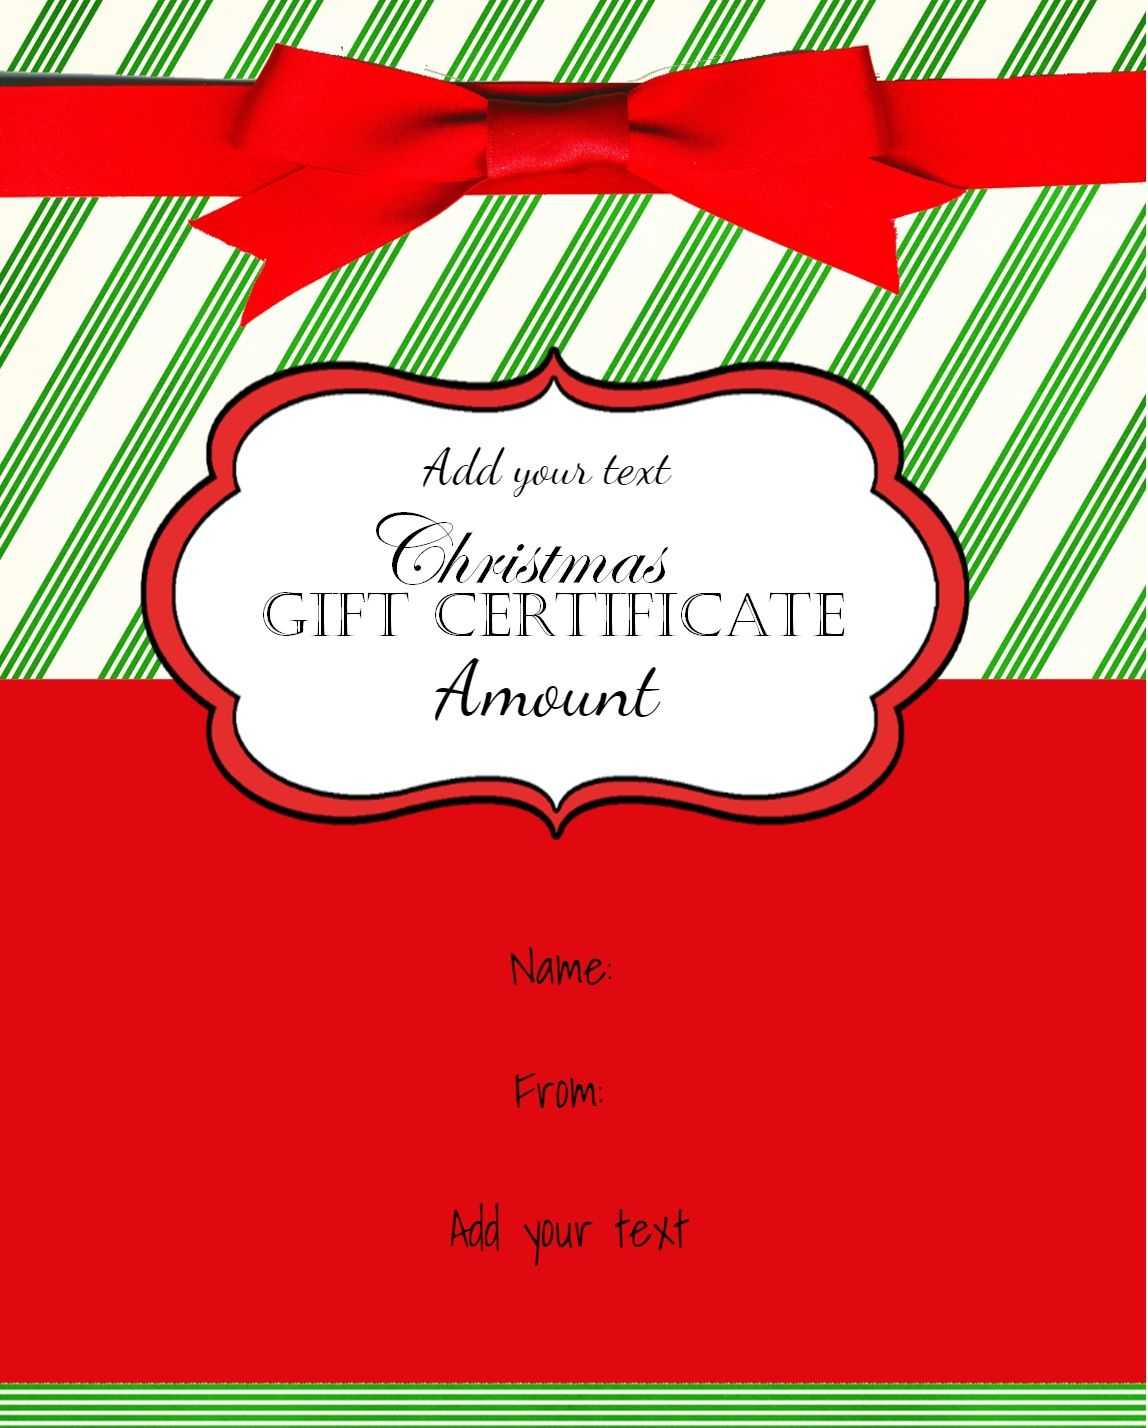 Pinamber M Ross On Gift Ideas | Gift Certificate Throughout Free Christmas Gift Certificate Templates